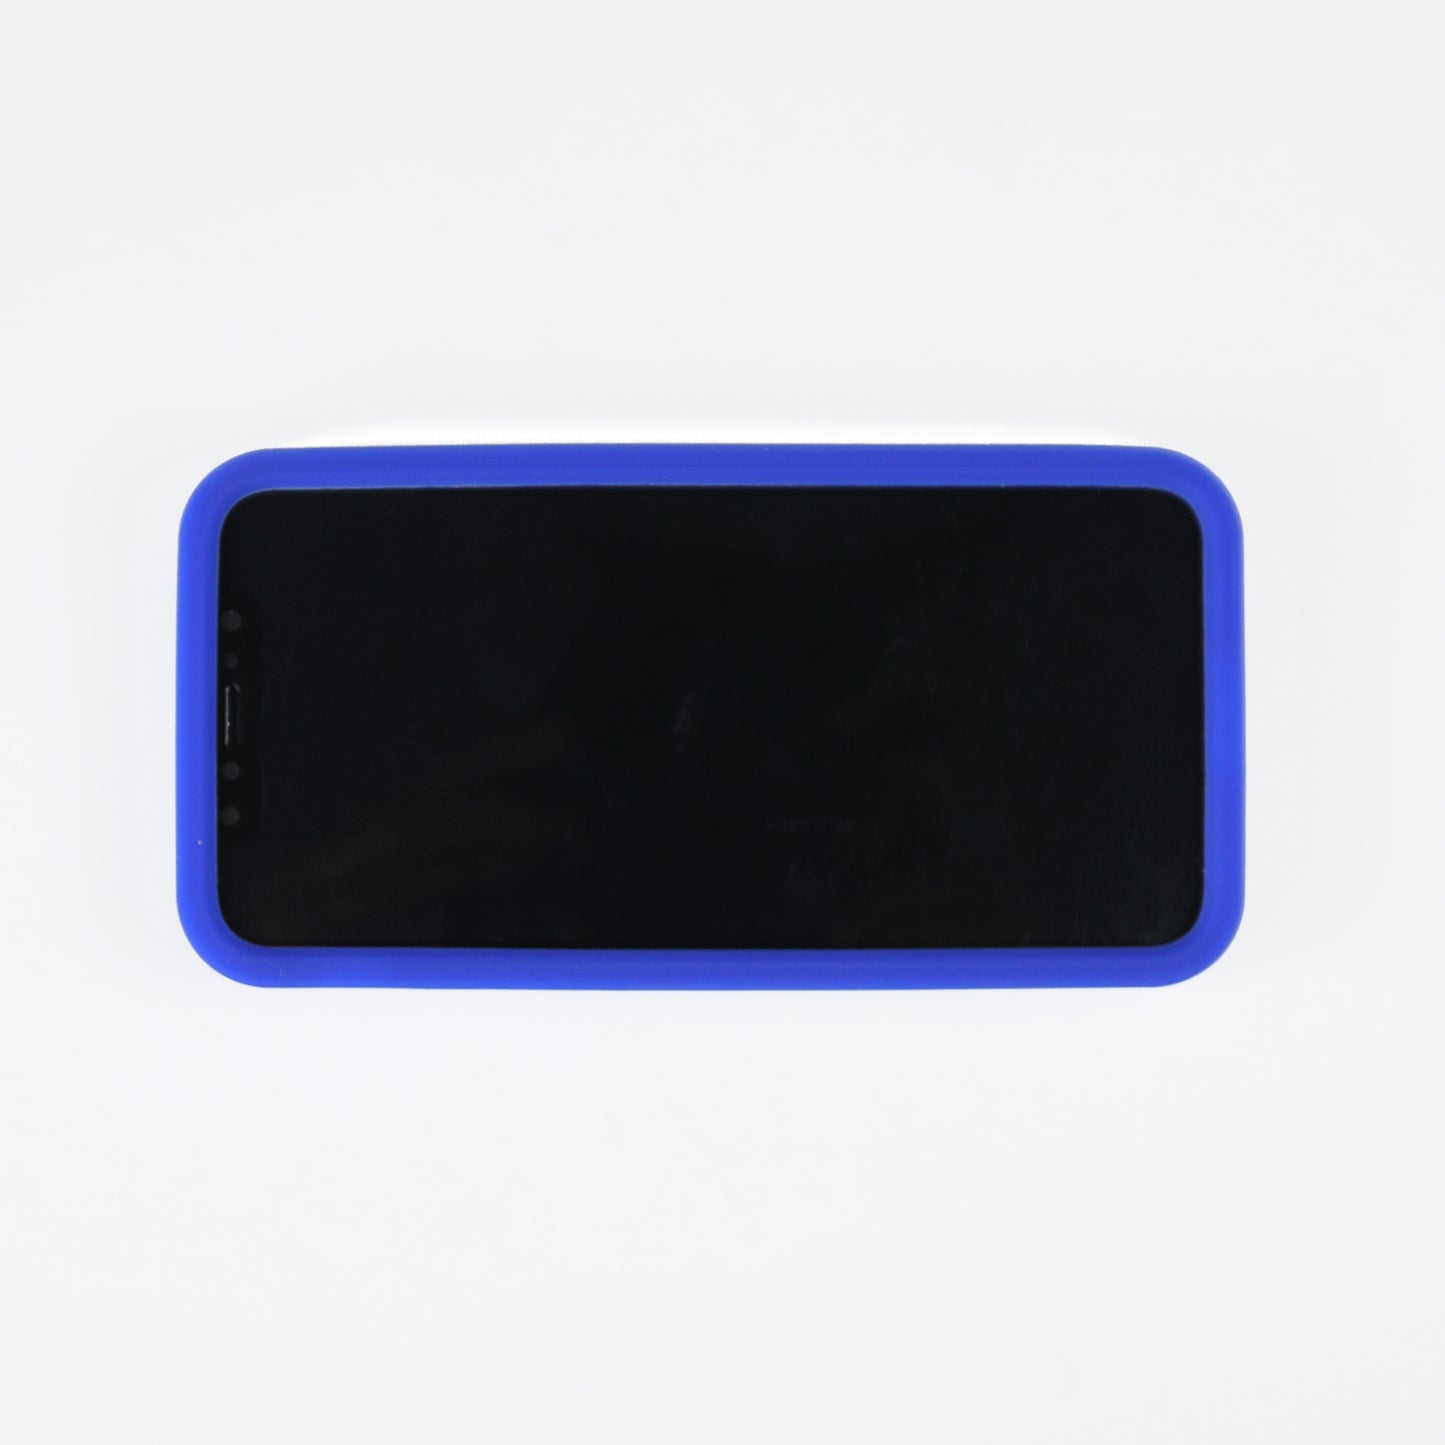 iPhone X/Xs Simple Case - Nice to Meet You (Blue)